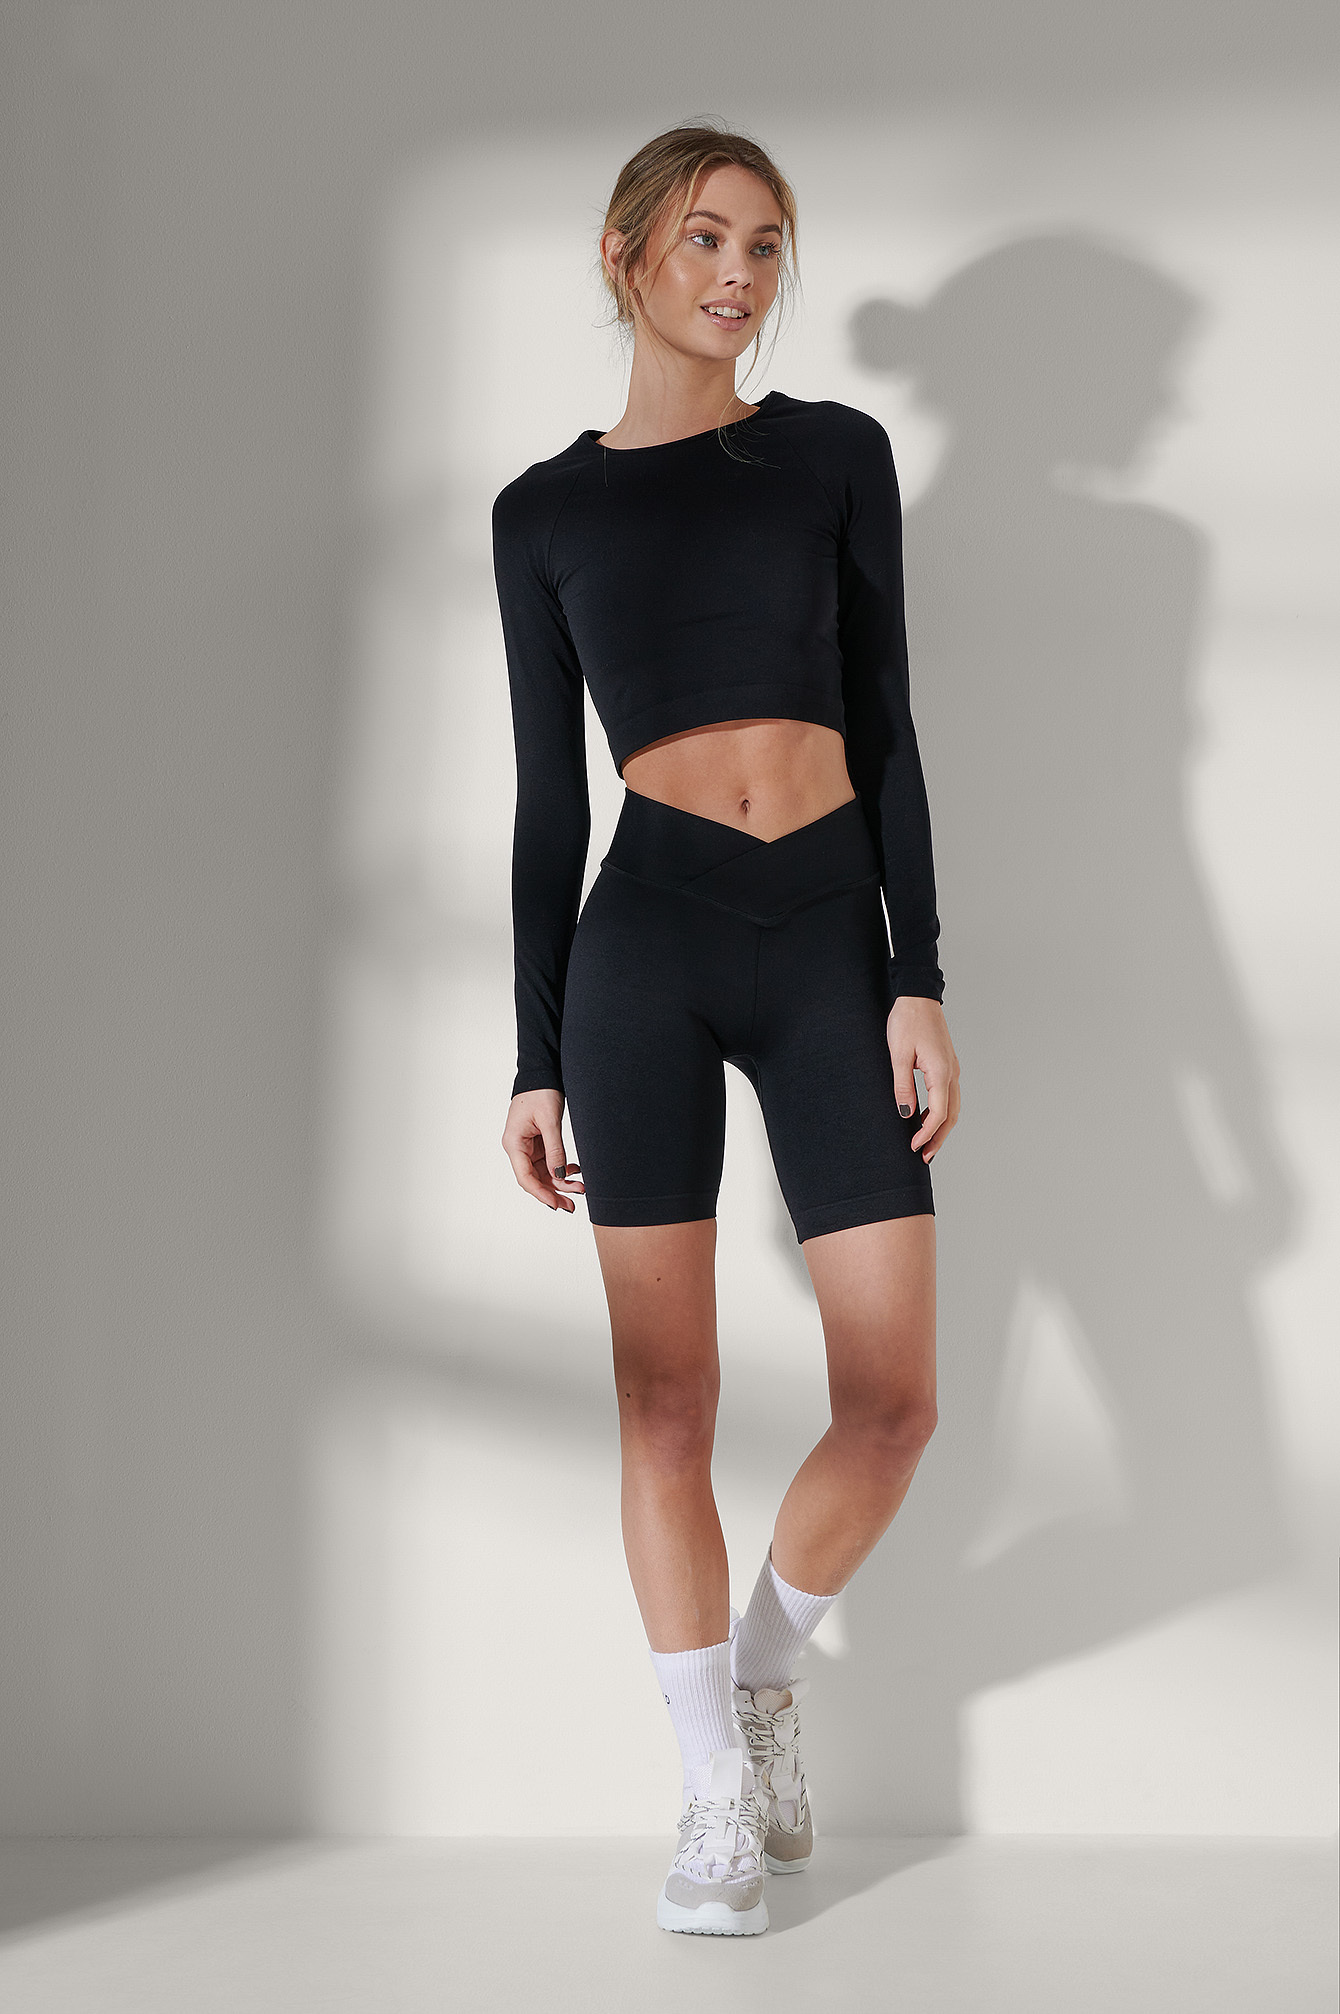 Seamless Mesh Top Outfit.